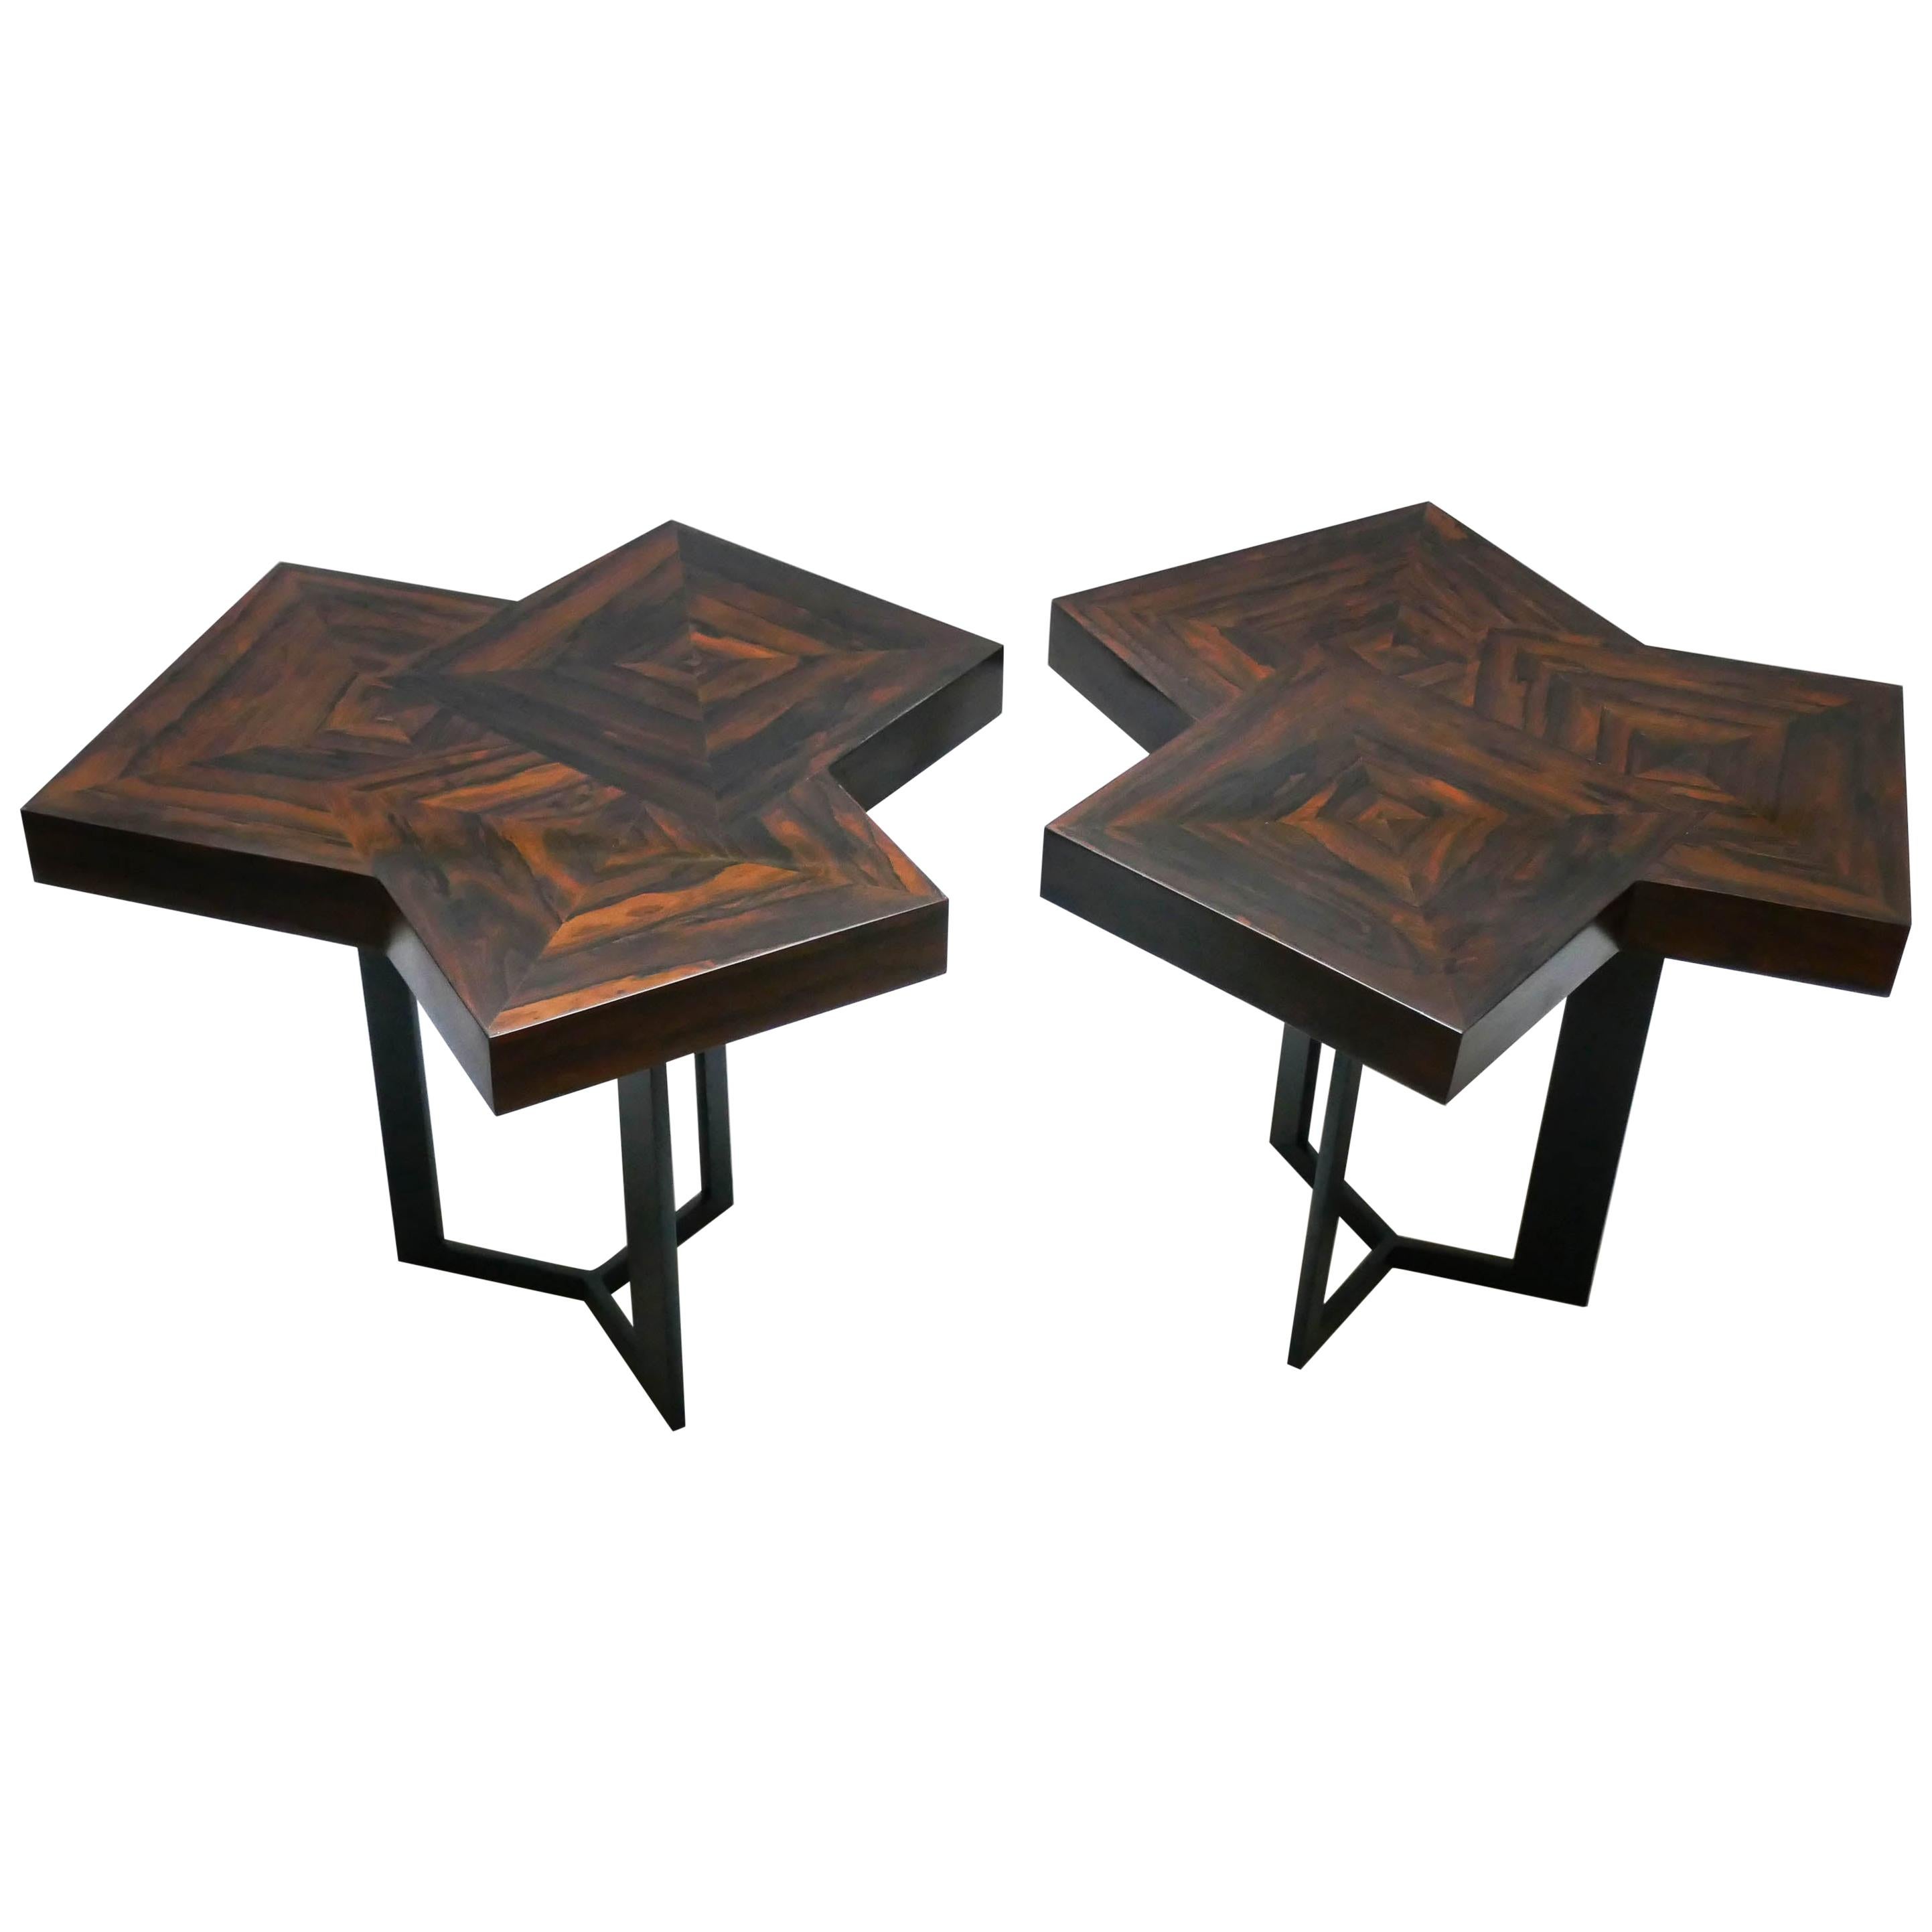 Pair of Coffee Table "Cubes" in Marquetery by Aymeric Lefort